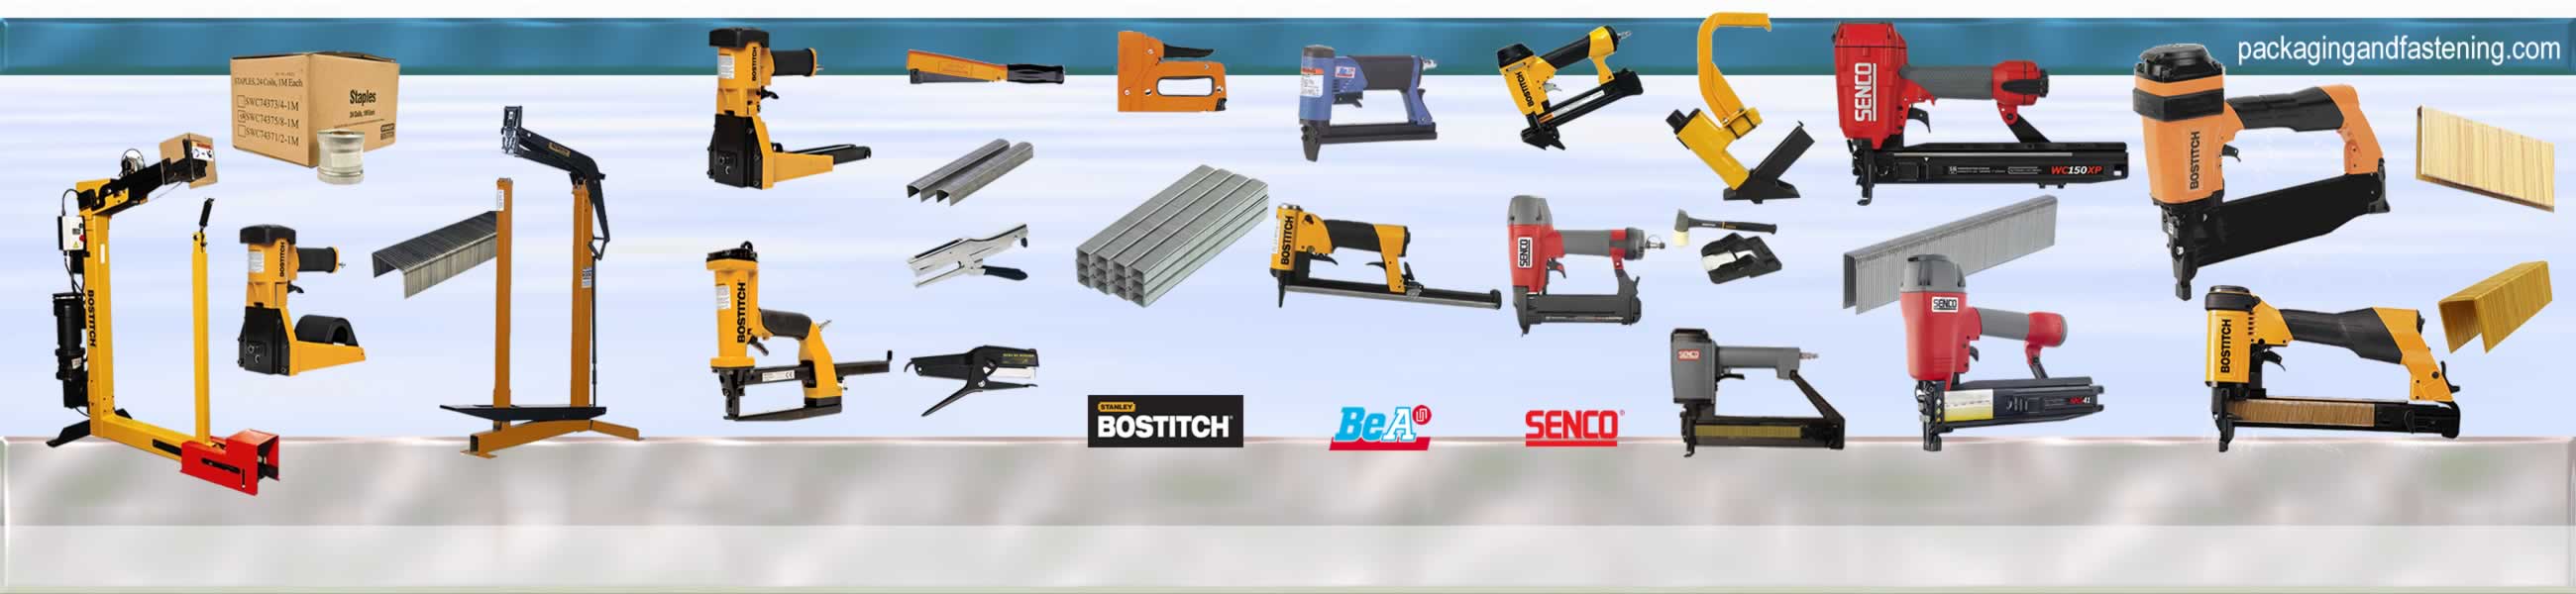 Staplers and staples are available for BeA, Bostitch, Paslode and Senco pneumatic staple guns or hand staplers.